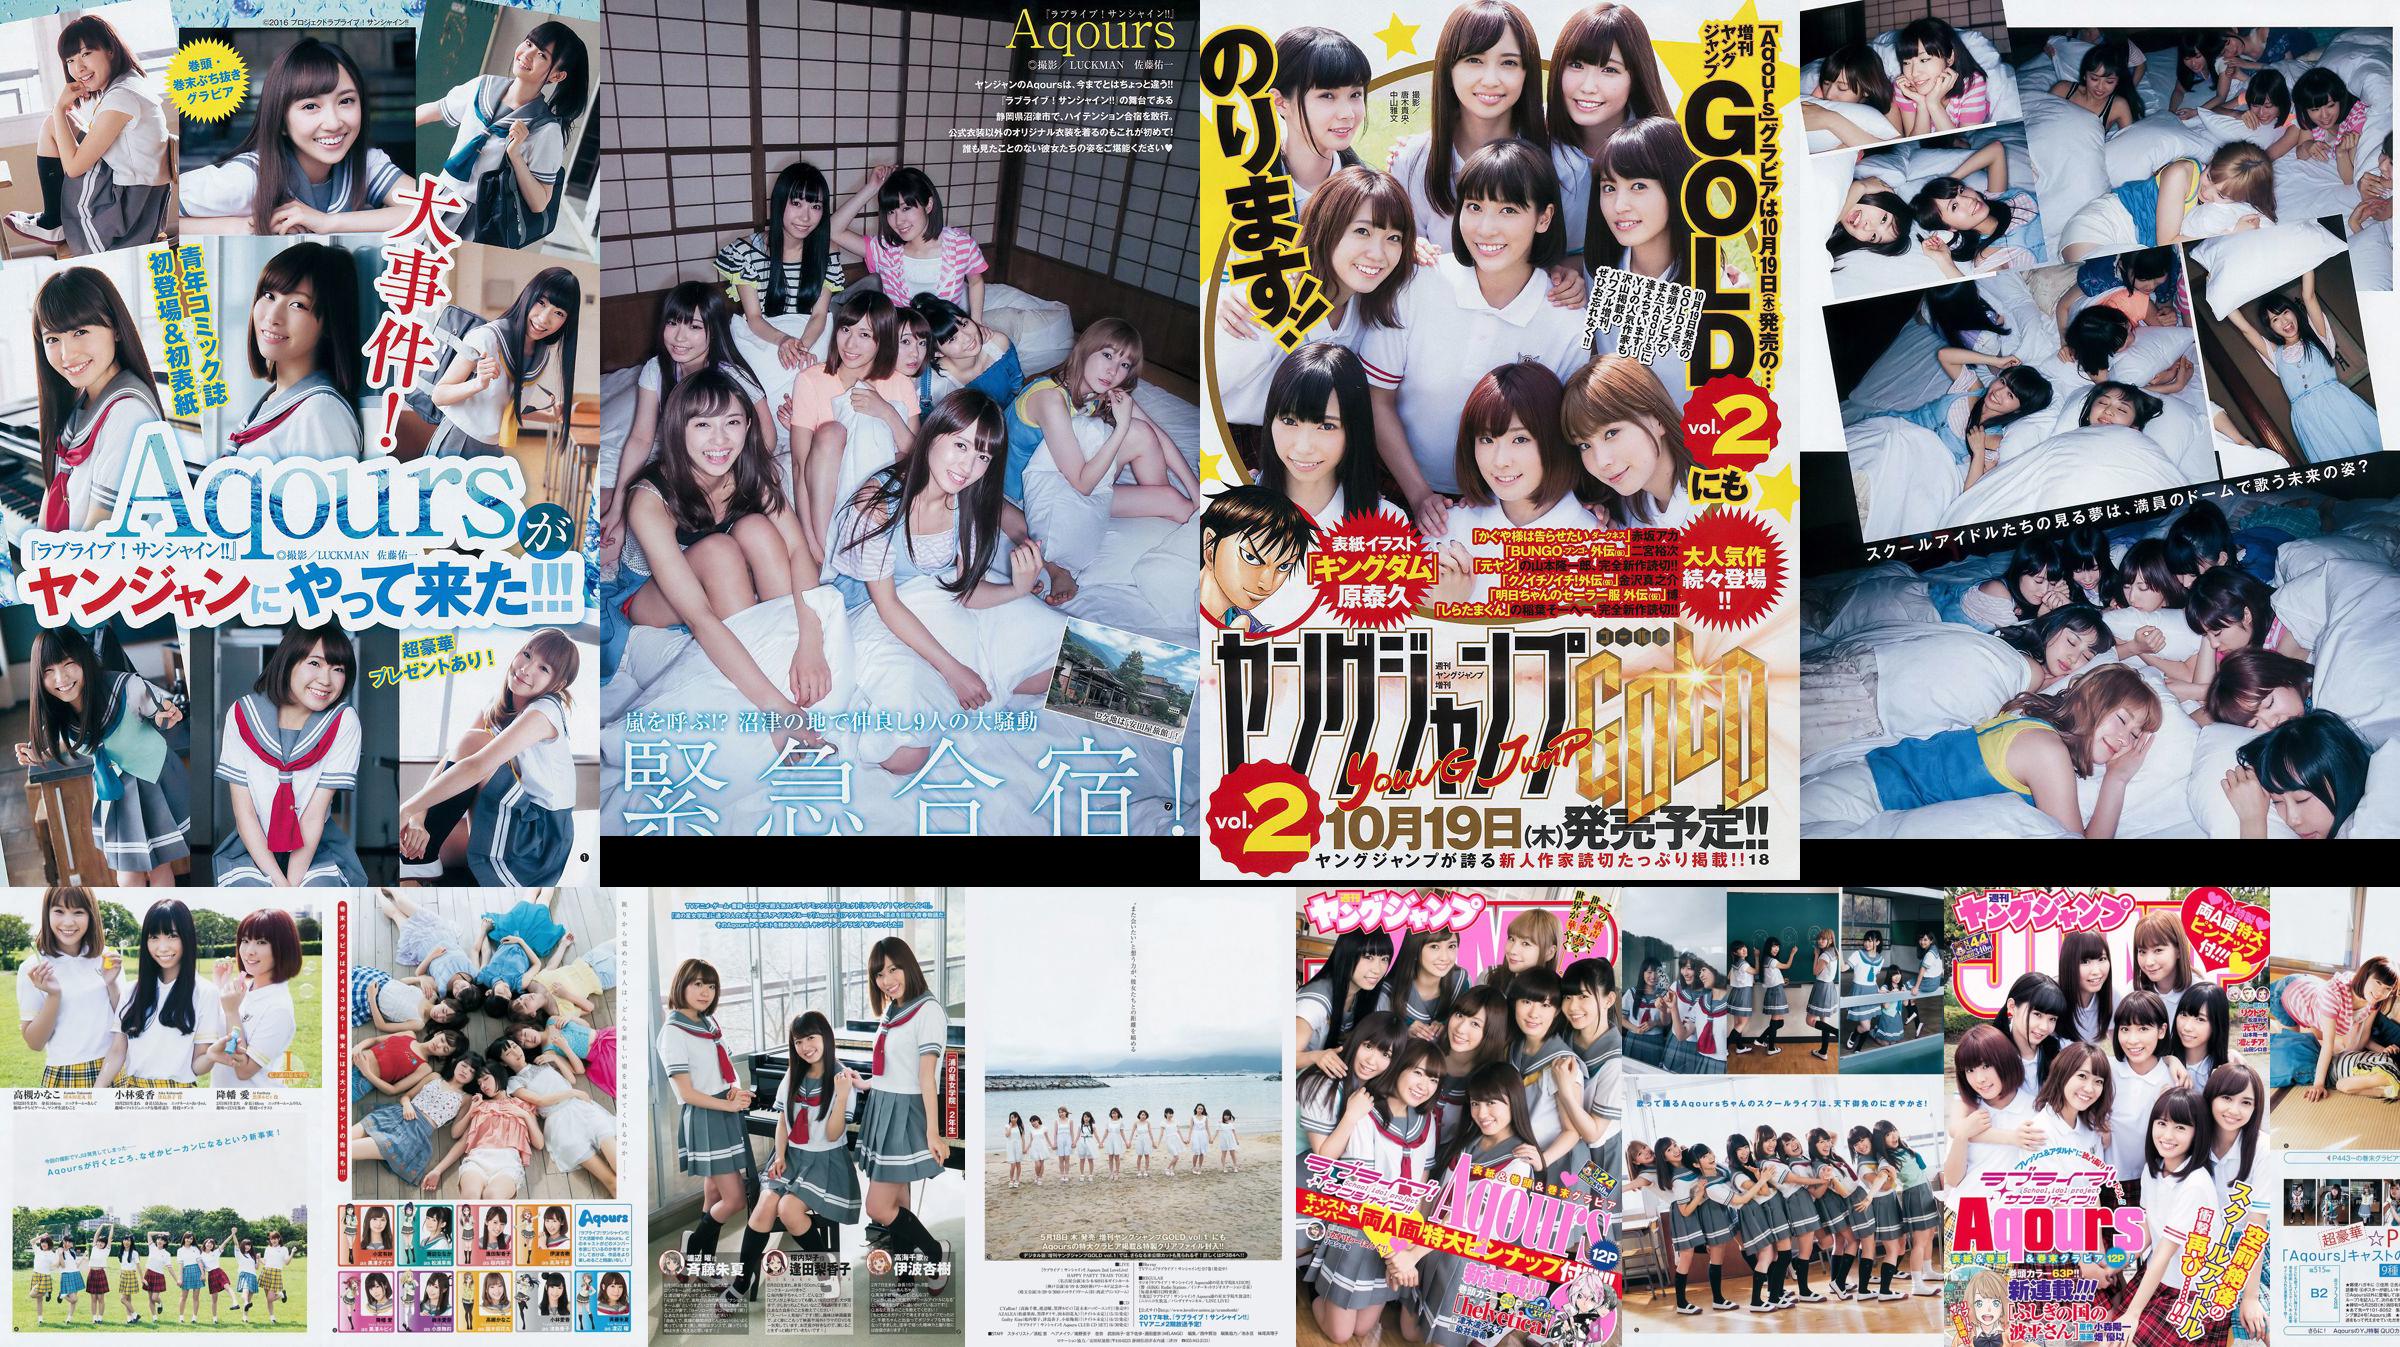 Japan Combination Aqours [Weekly Young Jump] Magazine photo n ° 44 2017 No.07ebe8 Page 1